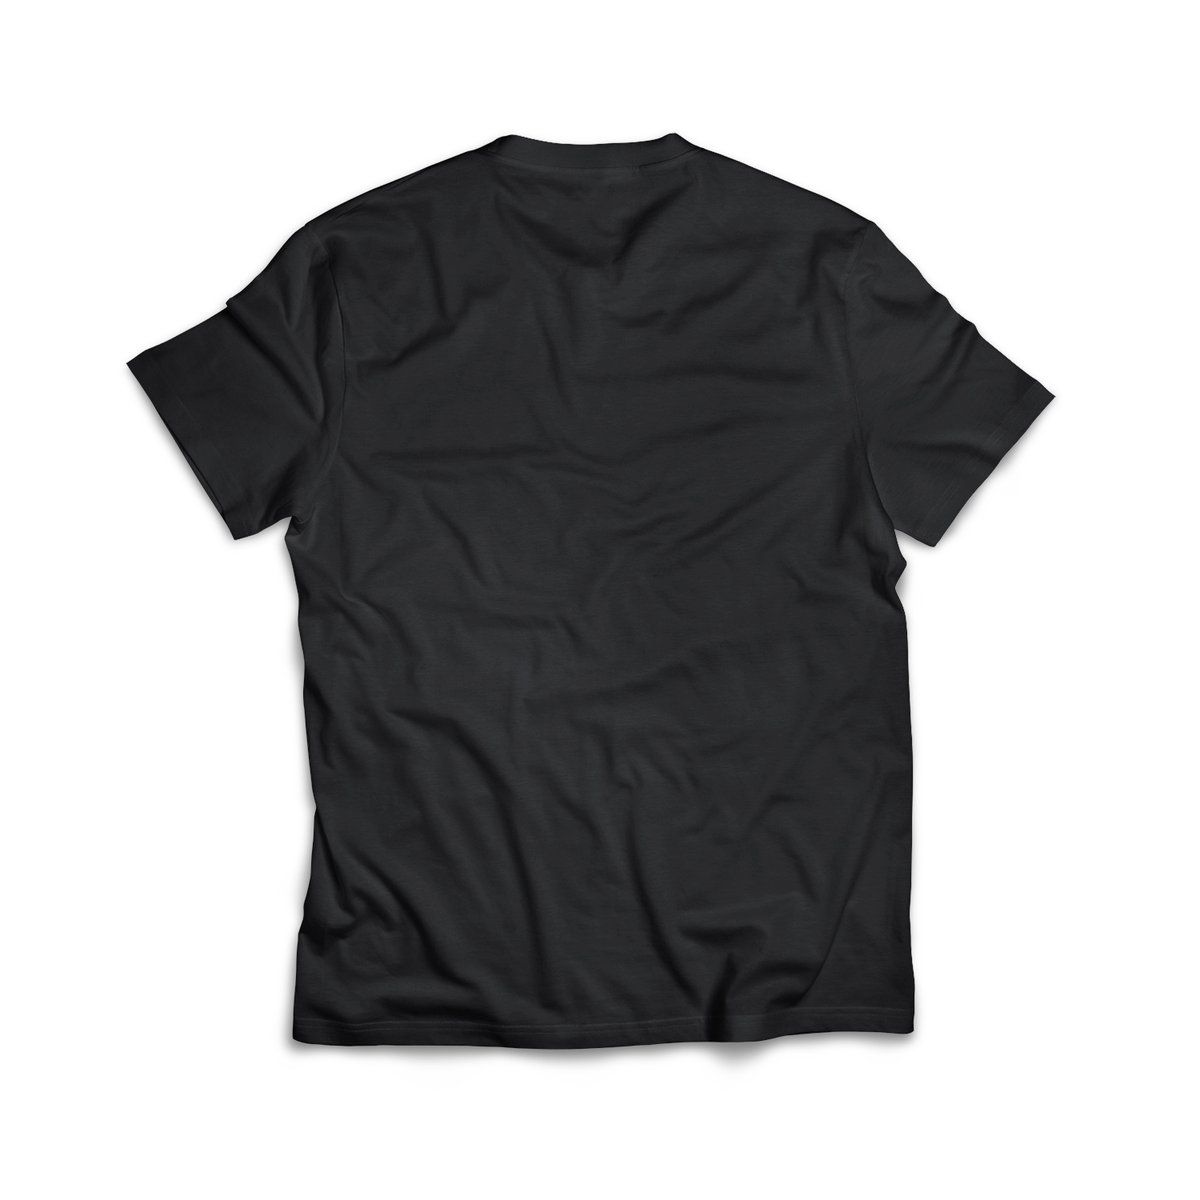 BLK X GRY AD Tee